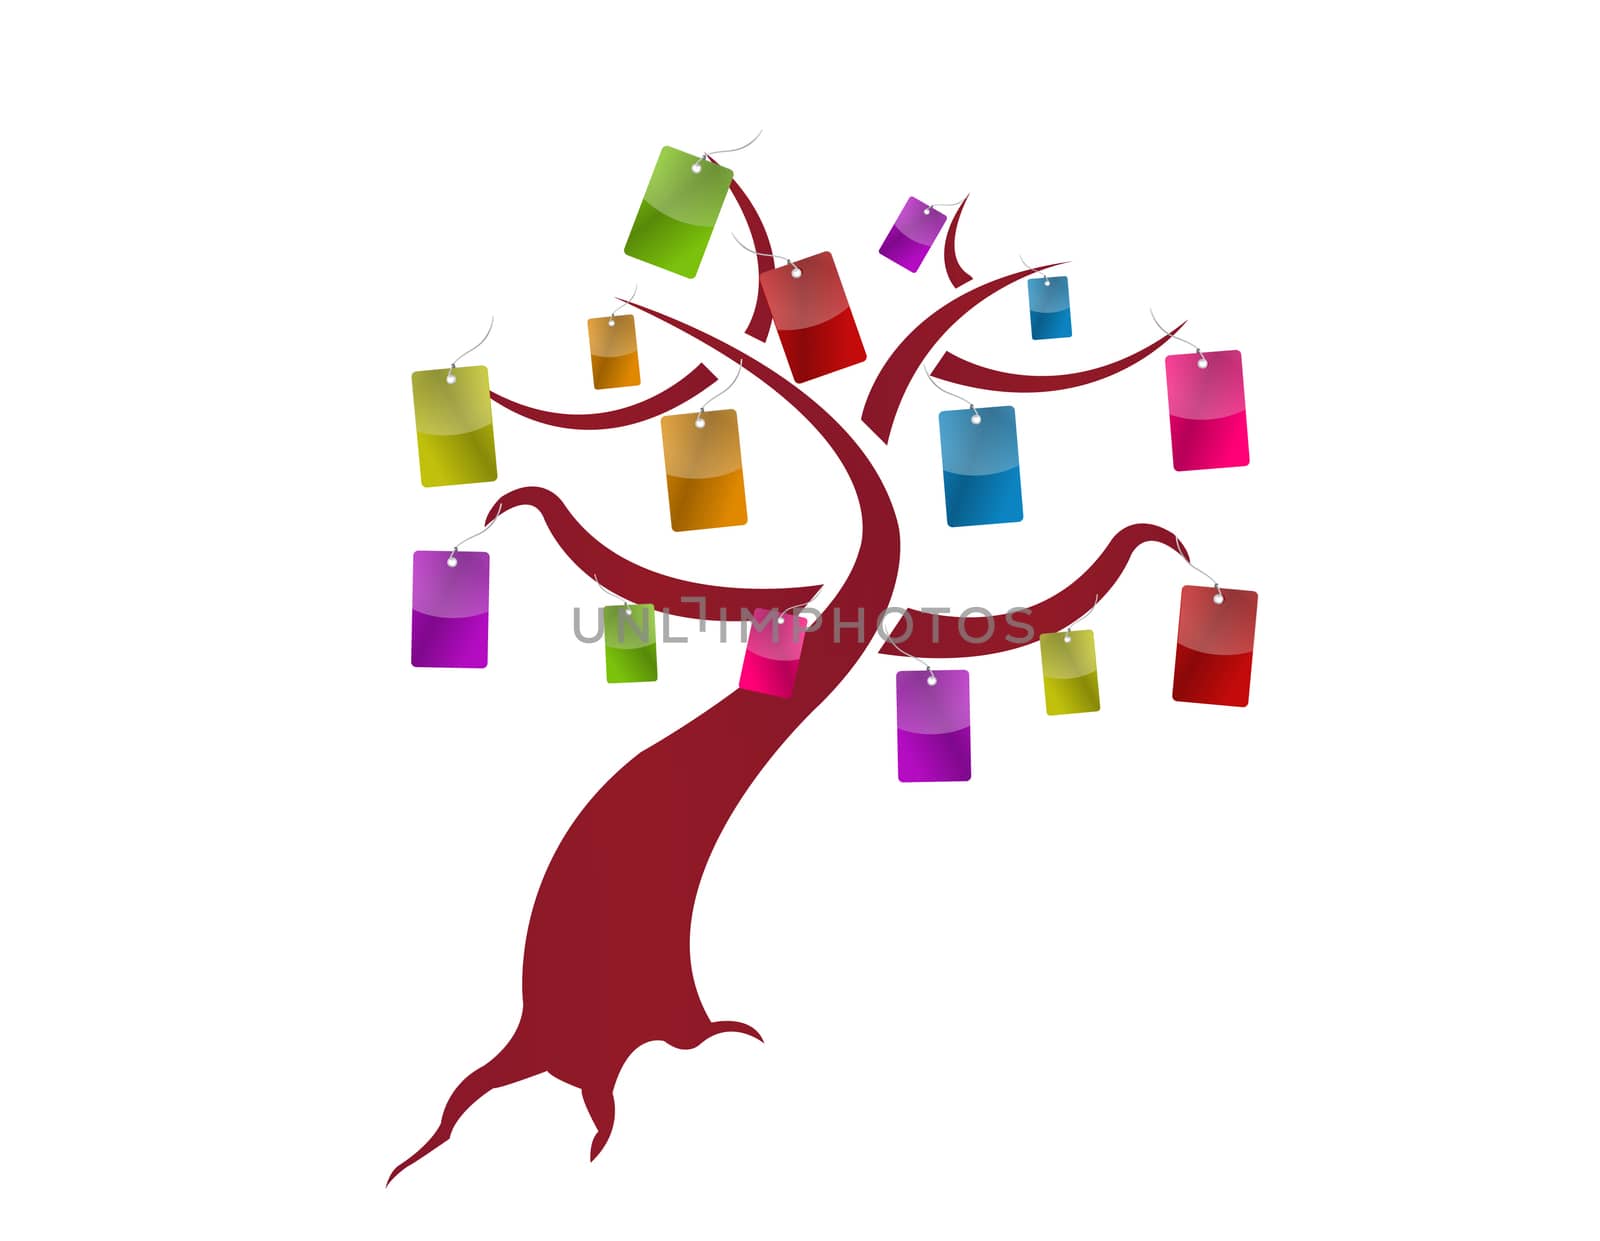 sale tags hanging from a tree illustration design by alexmillos